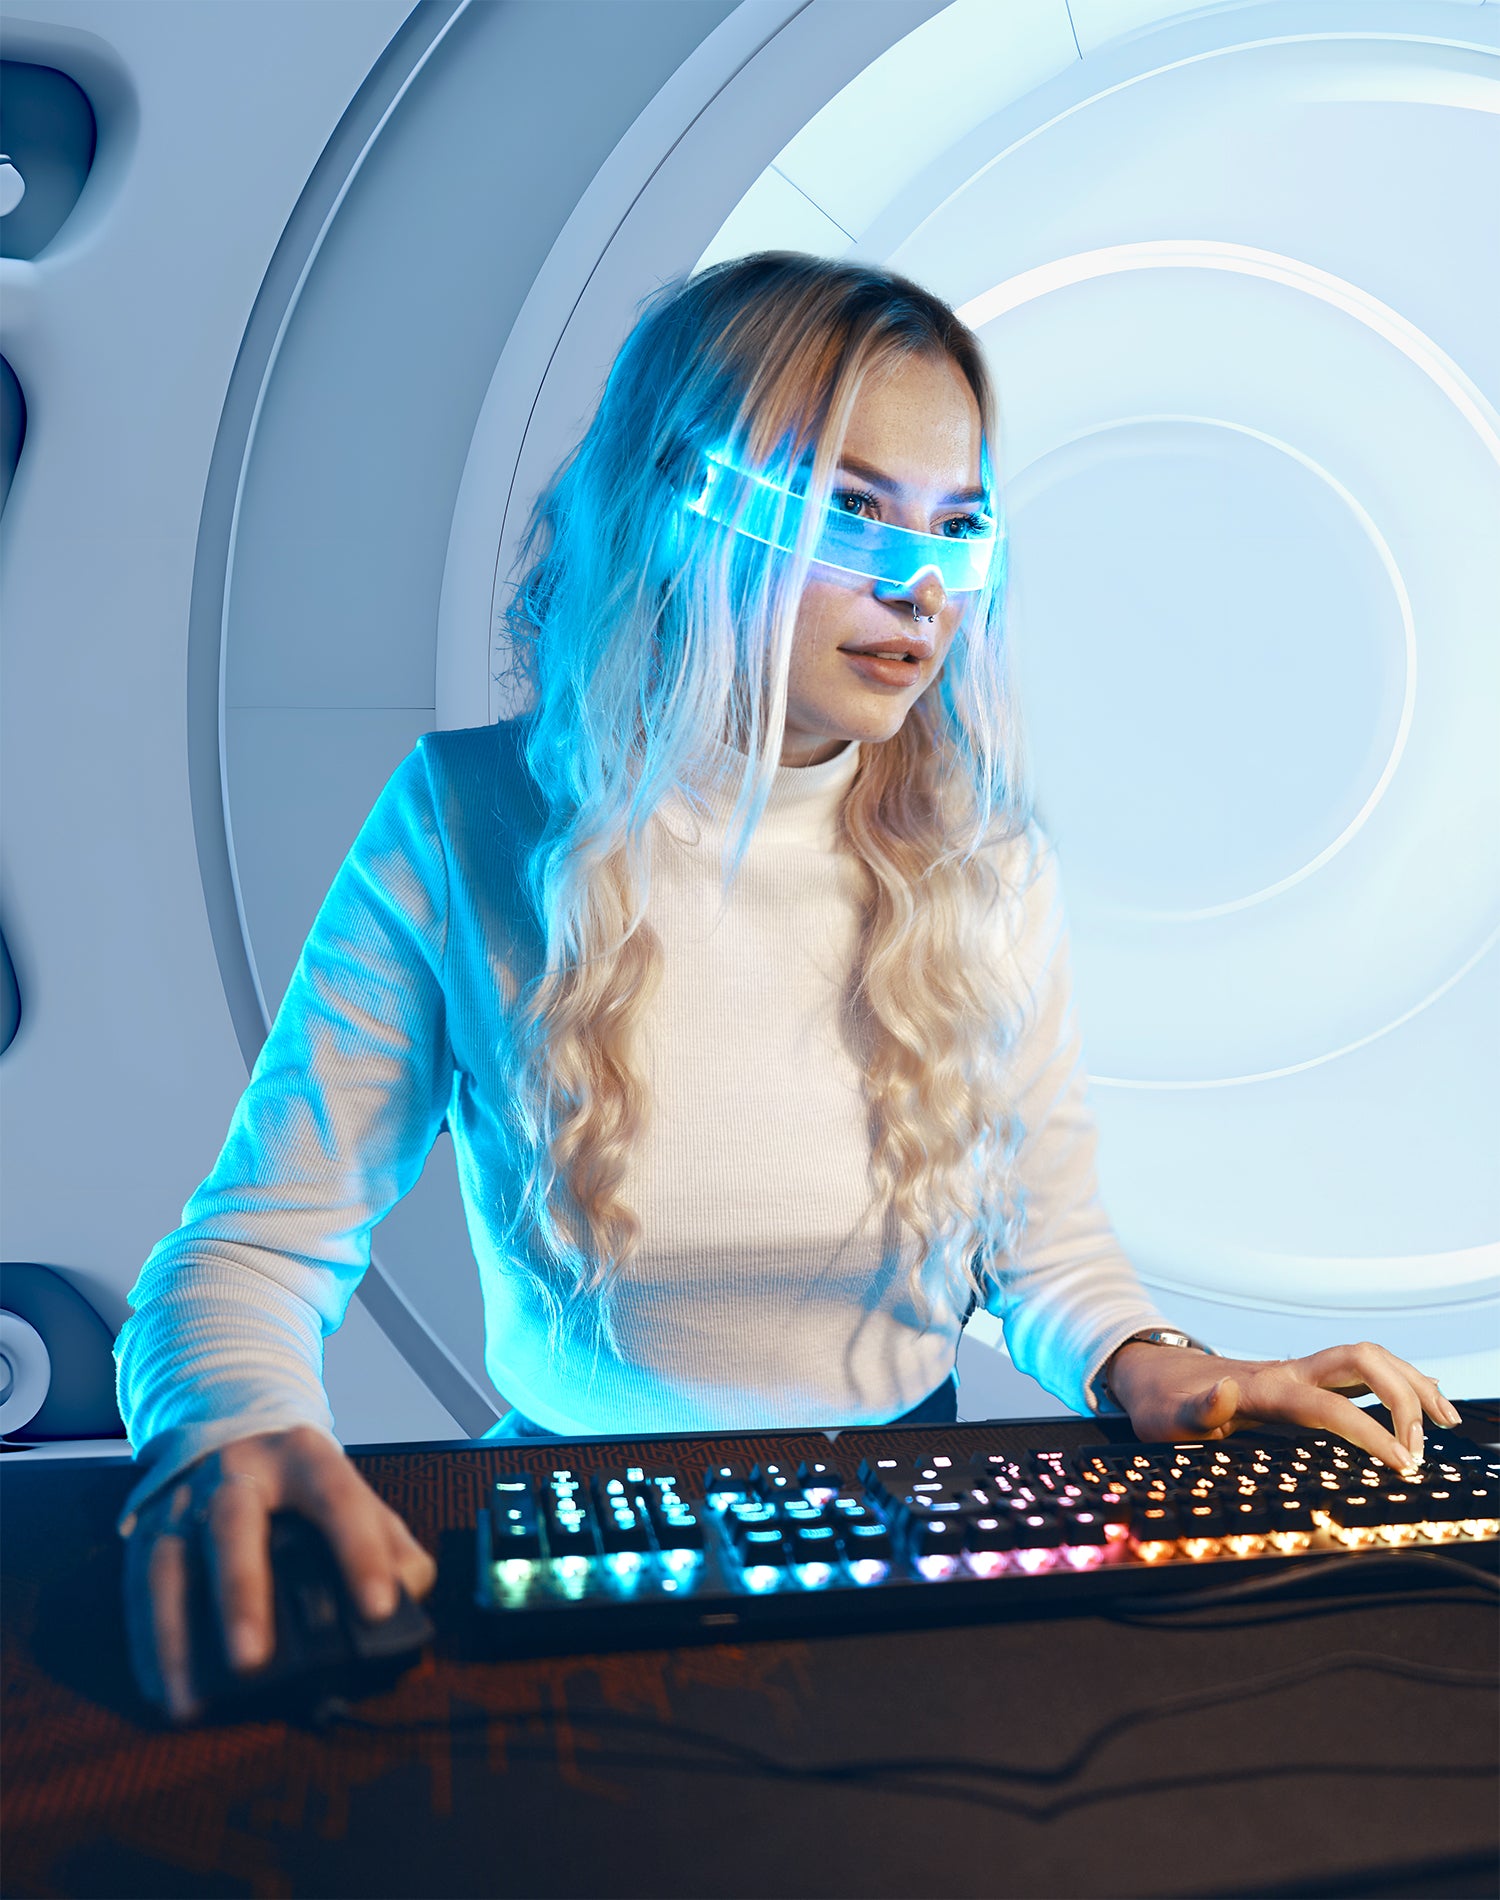 a cyber girl using an Illuminated high-tech keyboard and computer monitor in spaceship